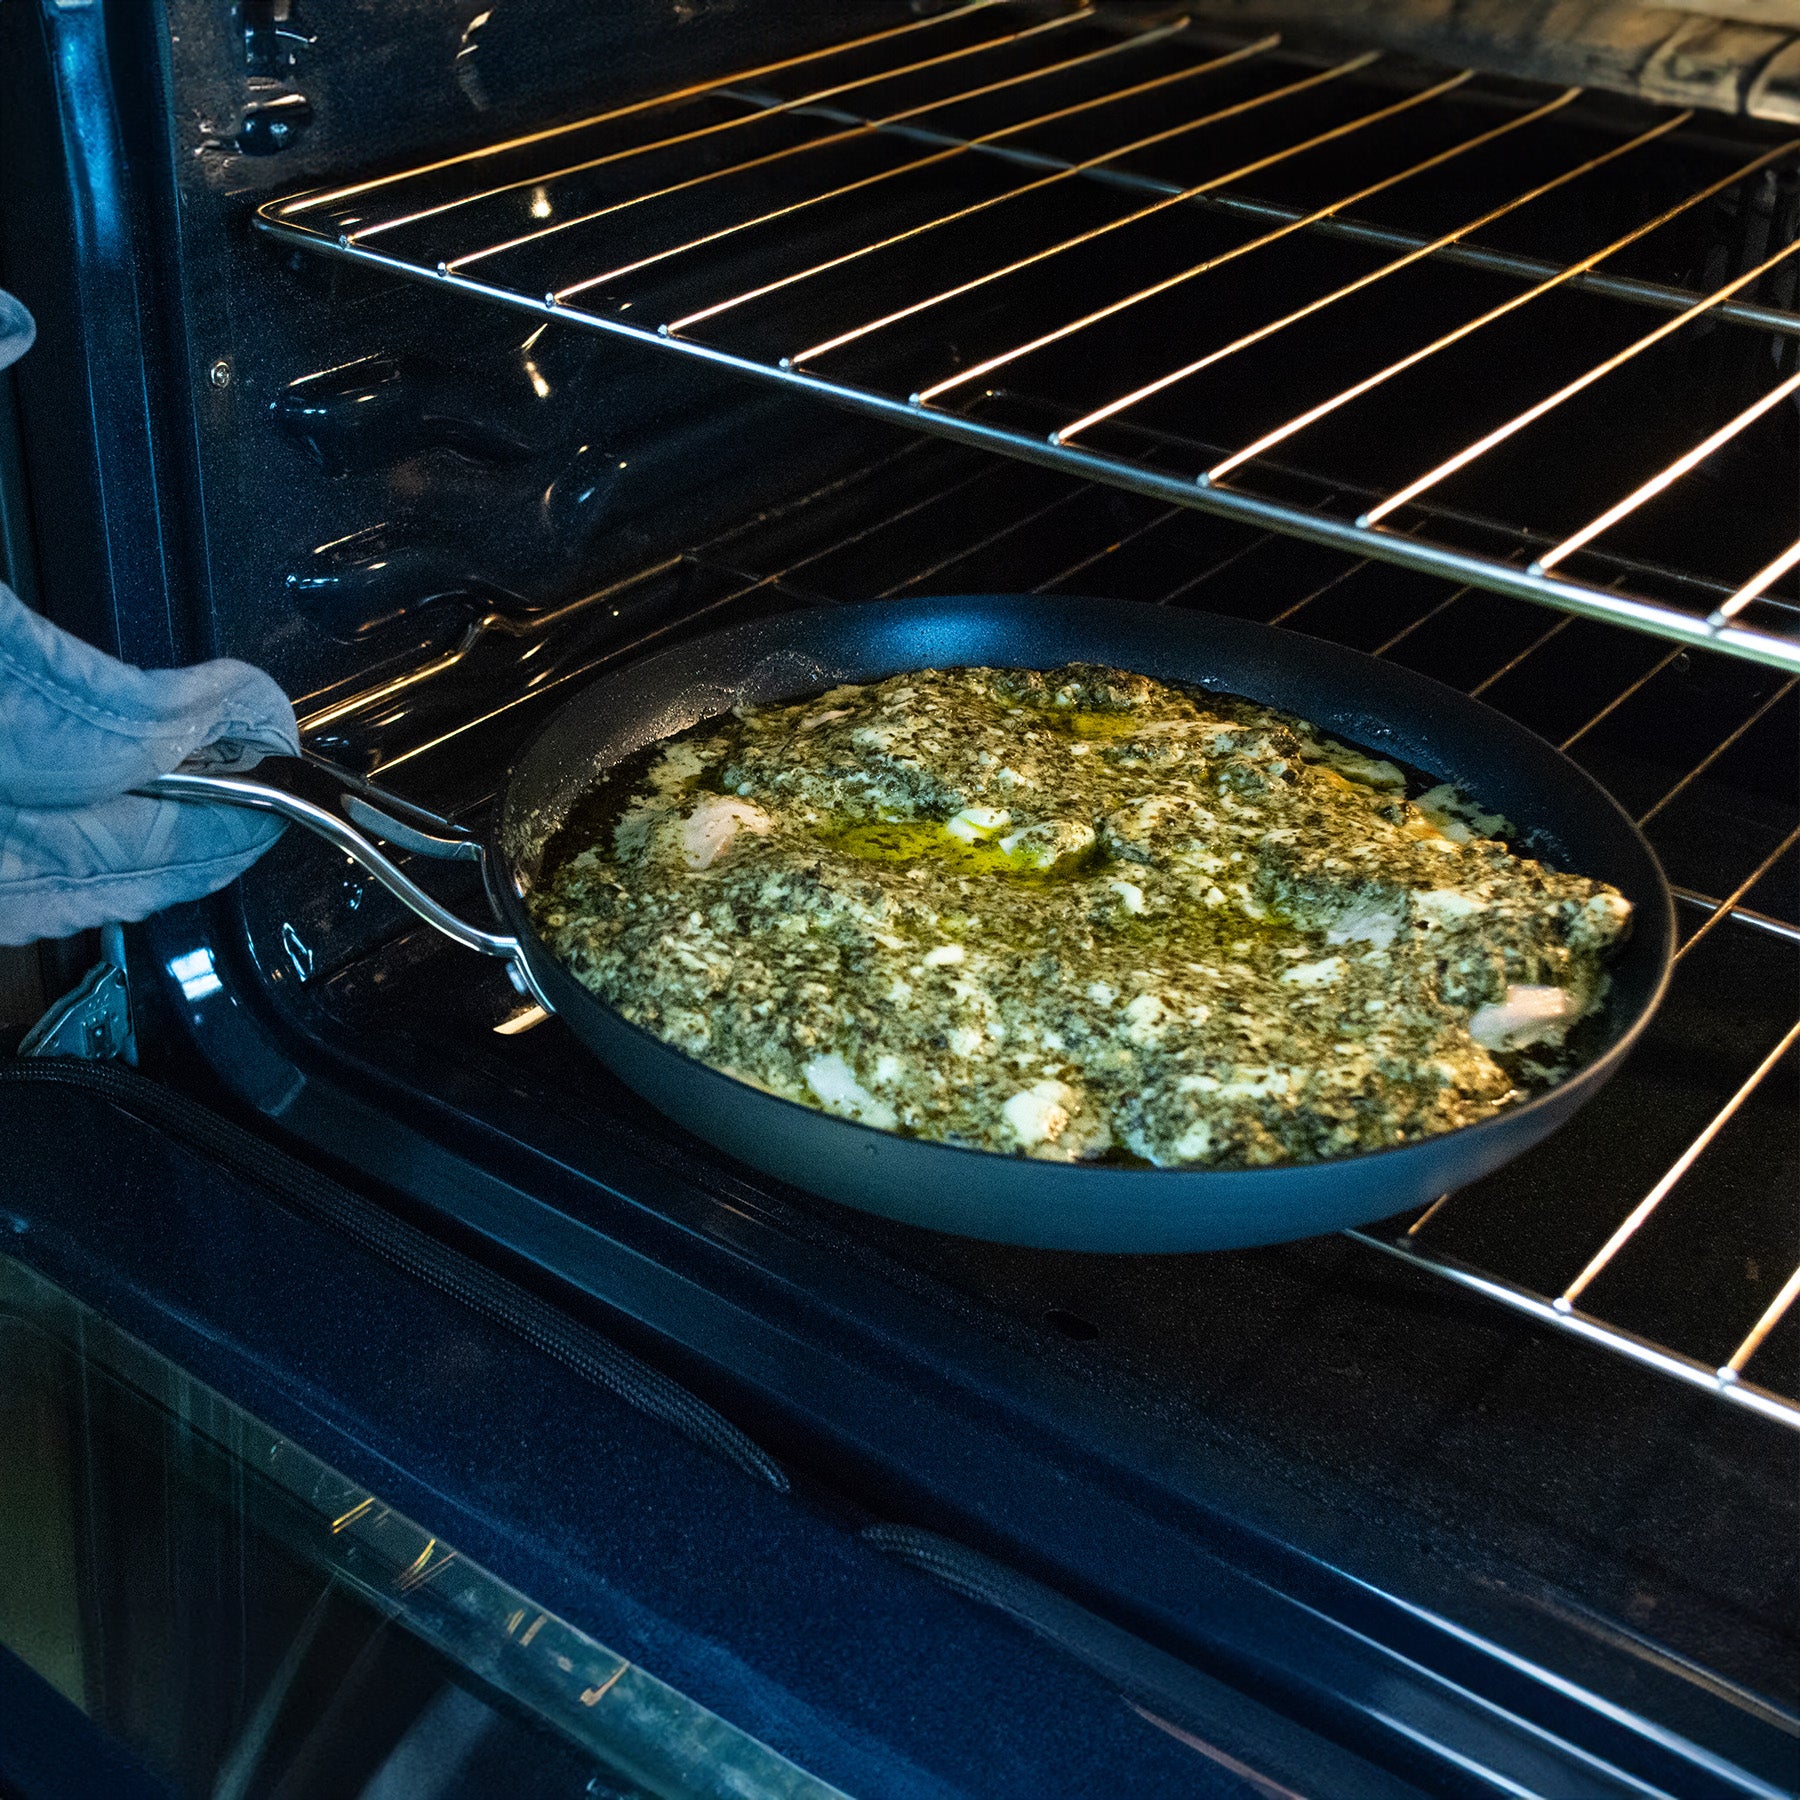 Hard Anodised Nonstick Fry Pan - Induction in use being put inside an oven on top of a rack